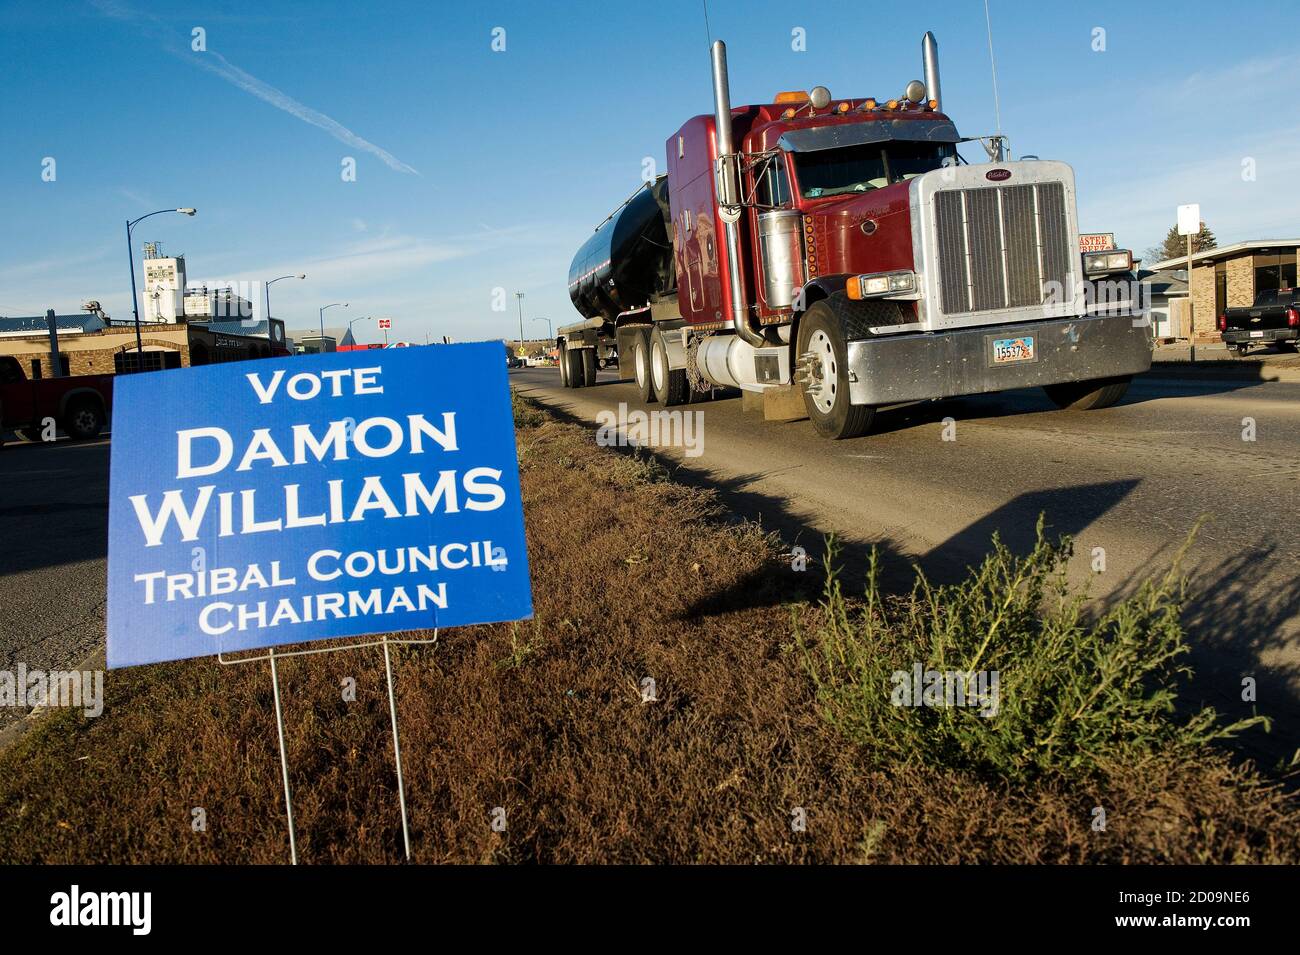 Oil field traffic passes a campaign sign for Three Affiliated Tribes council chairman candidate Damon Williams in New Town on the Fort Berthold Reservation in North Dakota, November 1, 2014. The Fort Berthold Indian Reservation, home to the Mandan, Hidatsa, and Arikara Nation, produces nearly a third of North Dakota's oil. The election for a new tribal chairman, in which both candidates have positioned themselves as reformers, may change the oil industry's relationship with the reservation. Photo taken November 1, 2014.   REUTERS/Andrew Cullen   (UNITED STATES - Tags: POLITICS ELECTIONS) Stock Photo